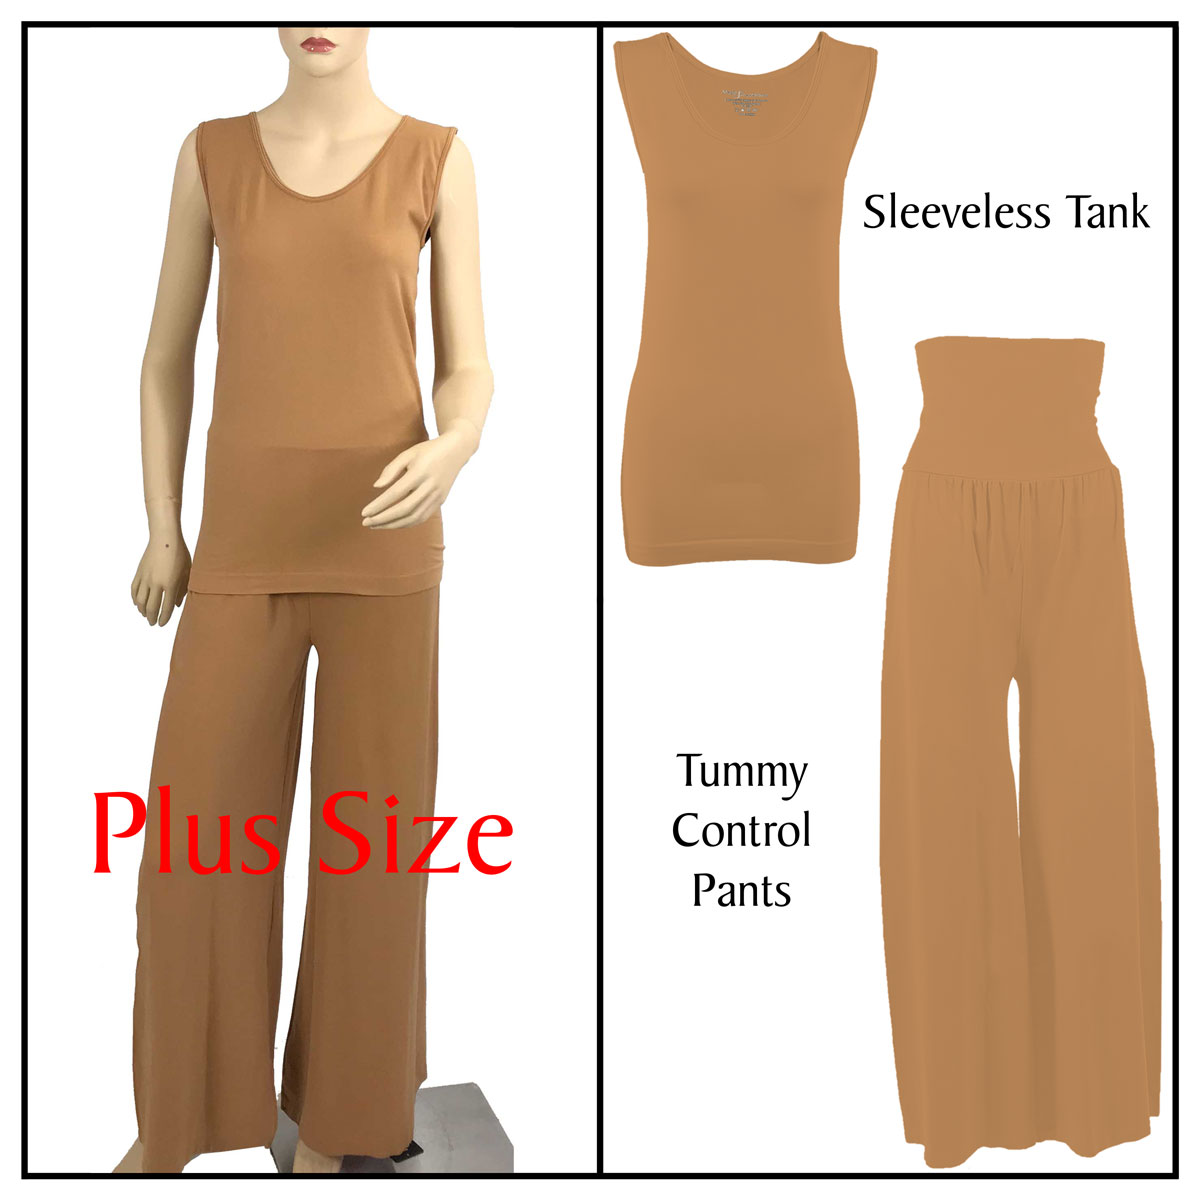 Copper Sleeveless Top (Plus Size) with Pants